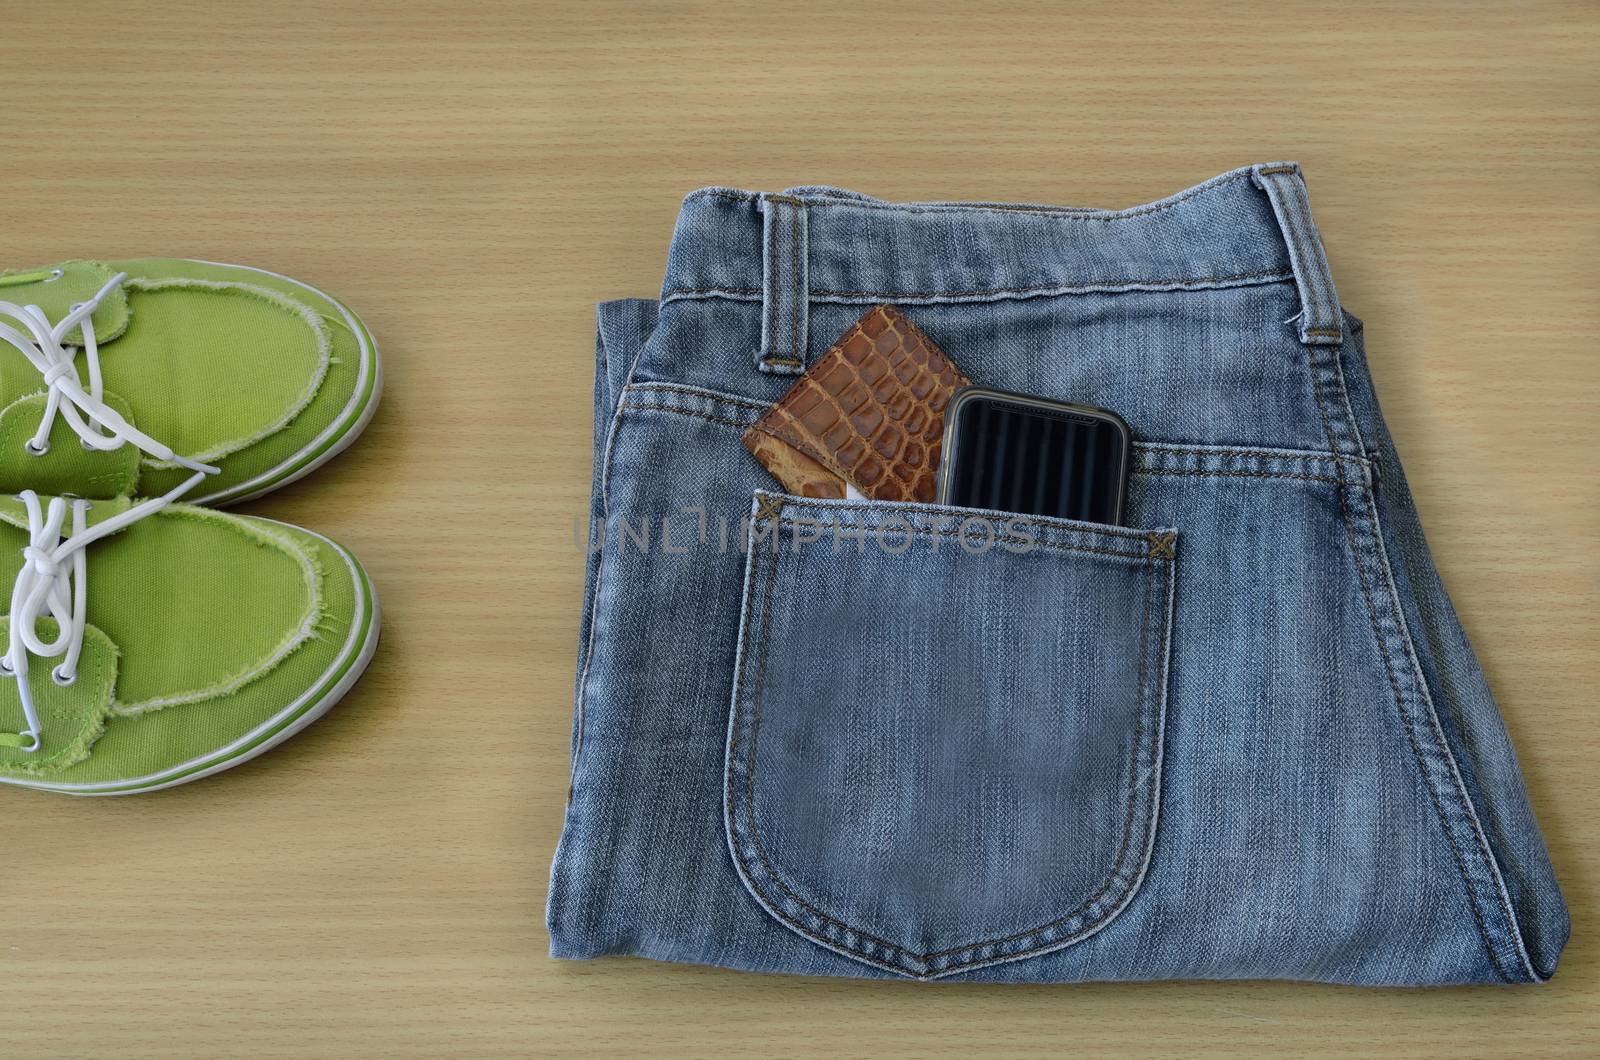 leather wallet and smart phone in jeans pocket,  sneakers on wooden background